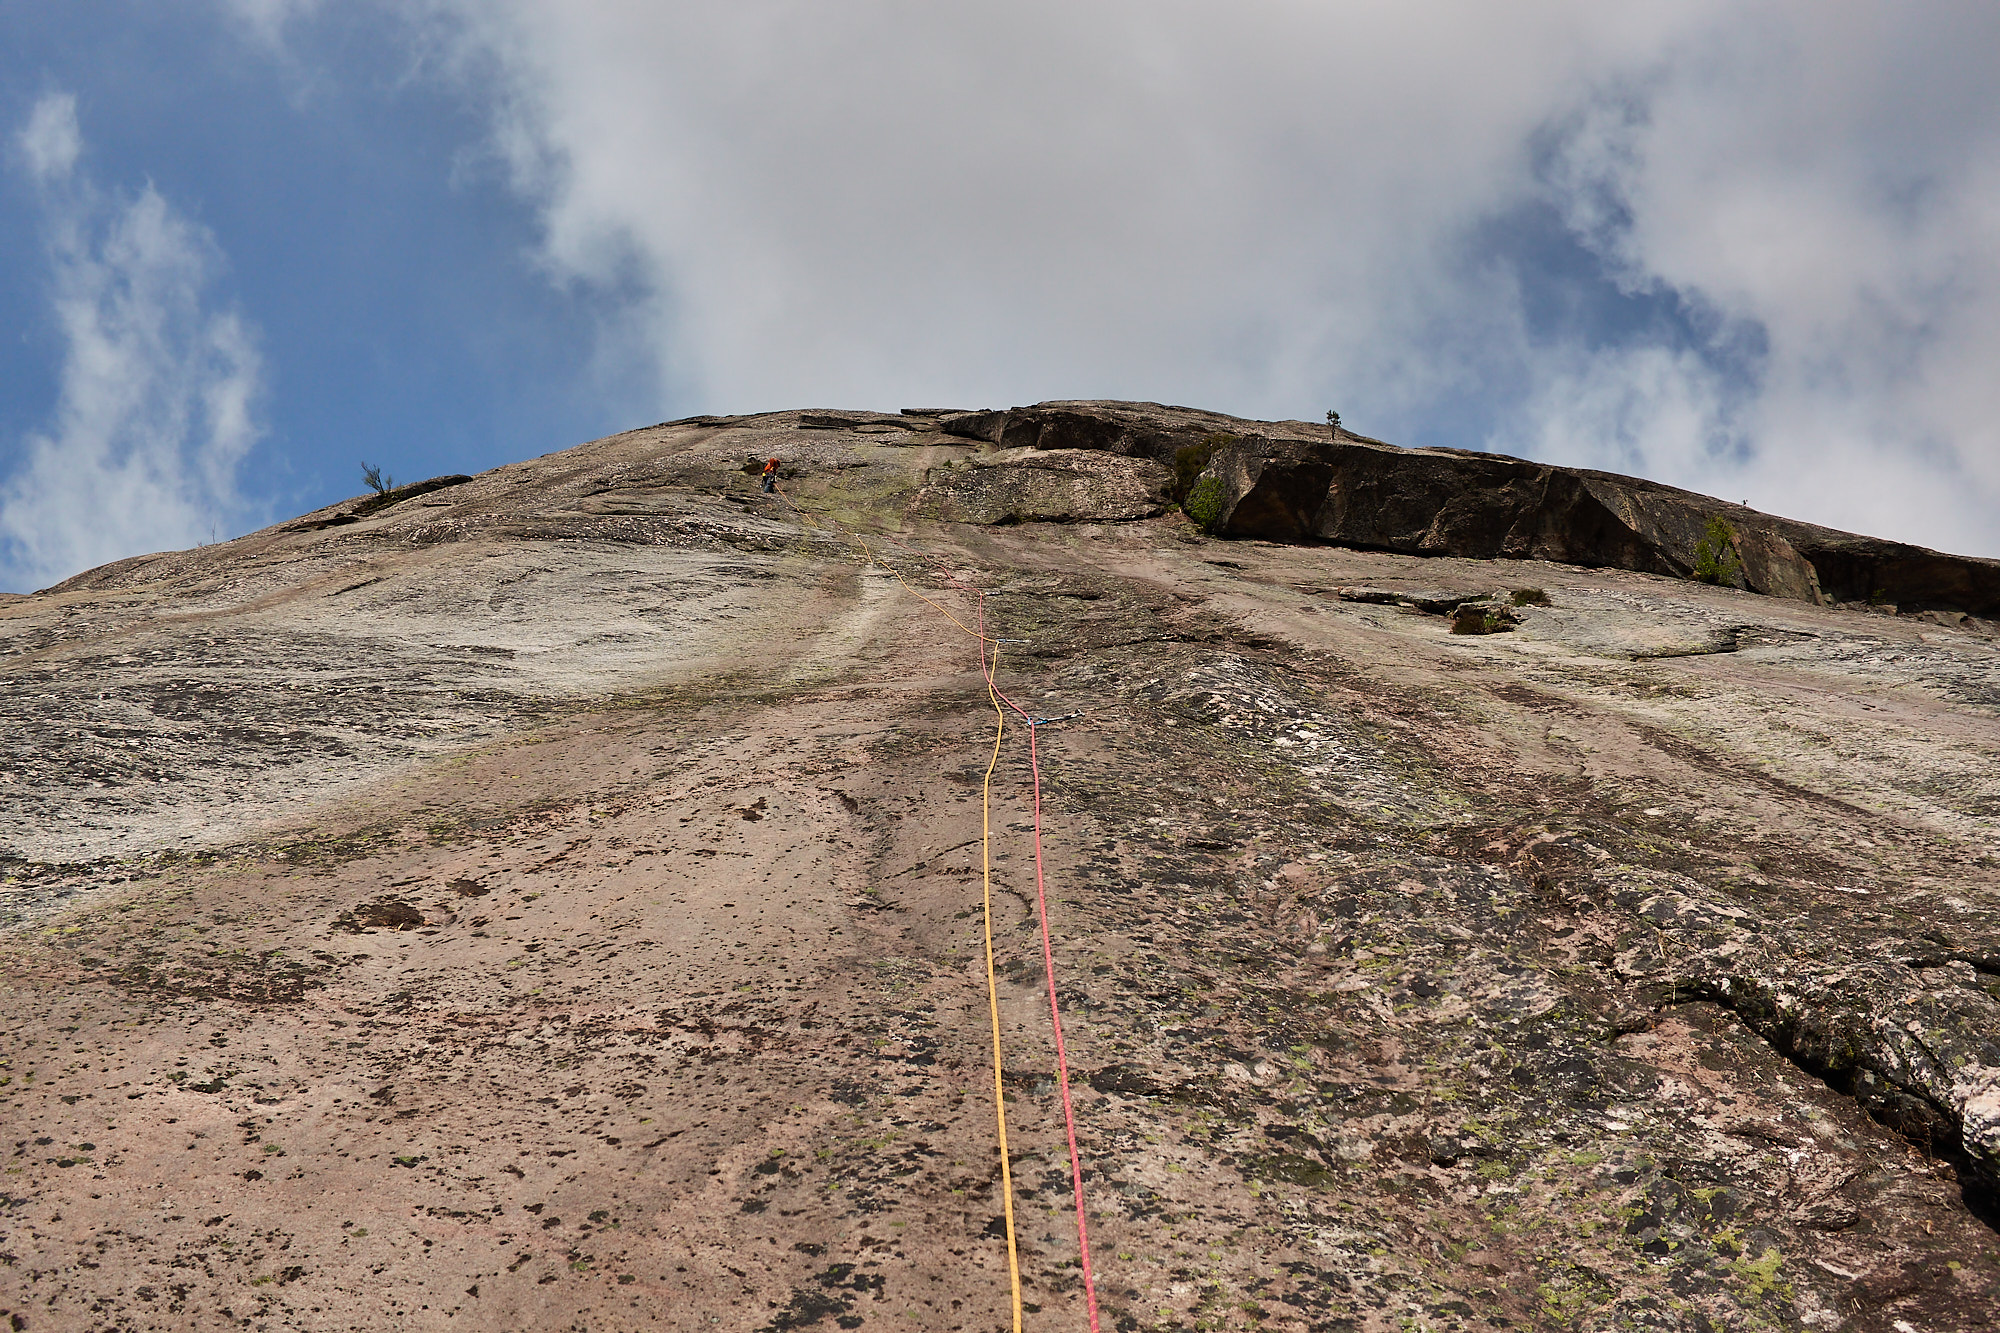 The second pitch of the rock climb called Agent Orange